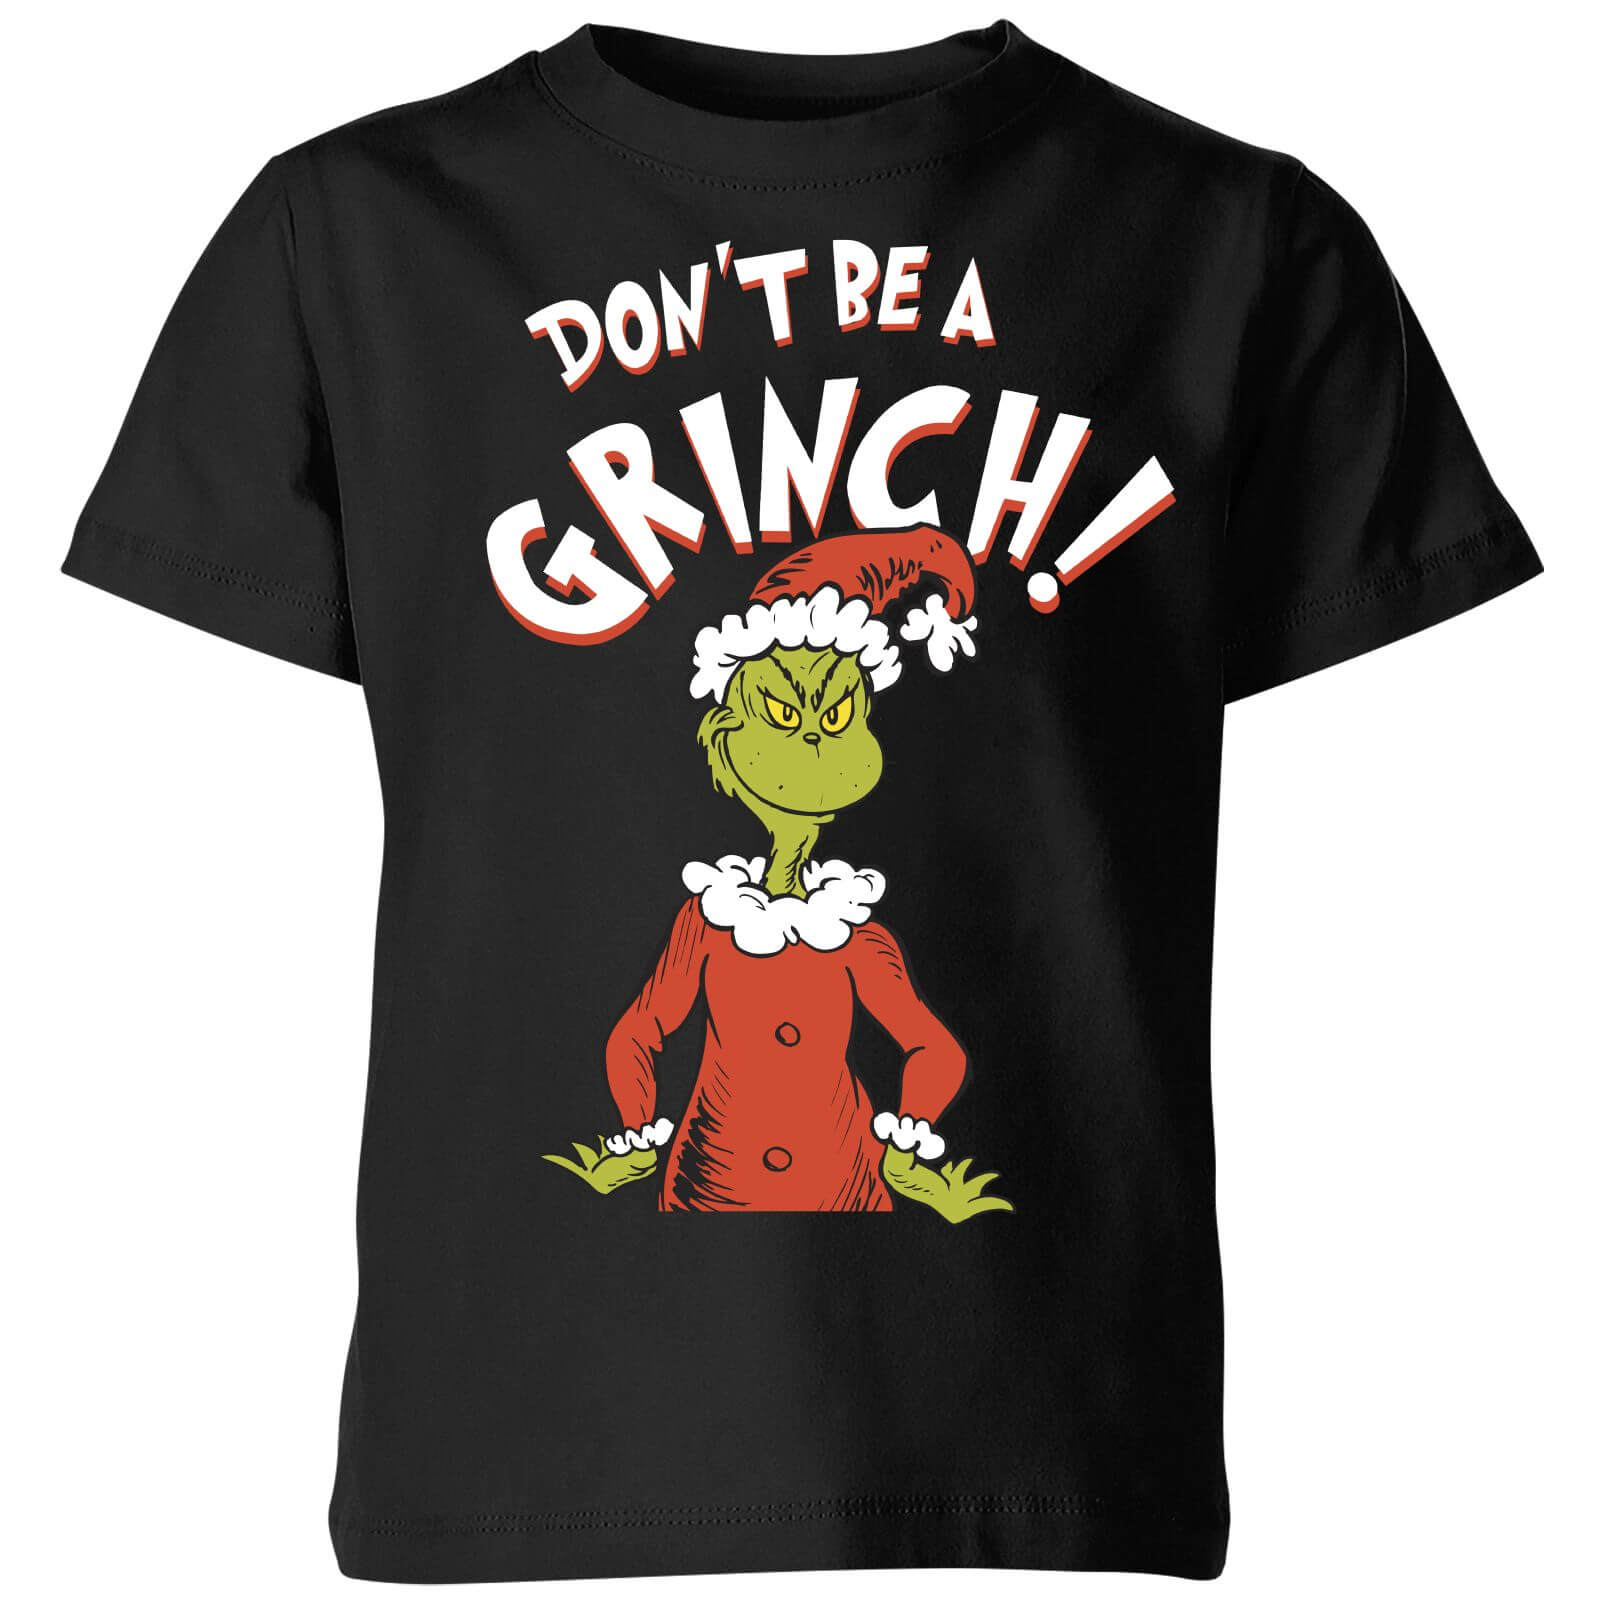 The Grinch Dont Be A Grinch Kids Christmas T-Shirt - Black - 3-4 Years